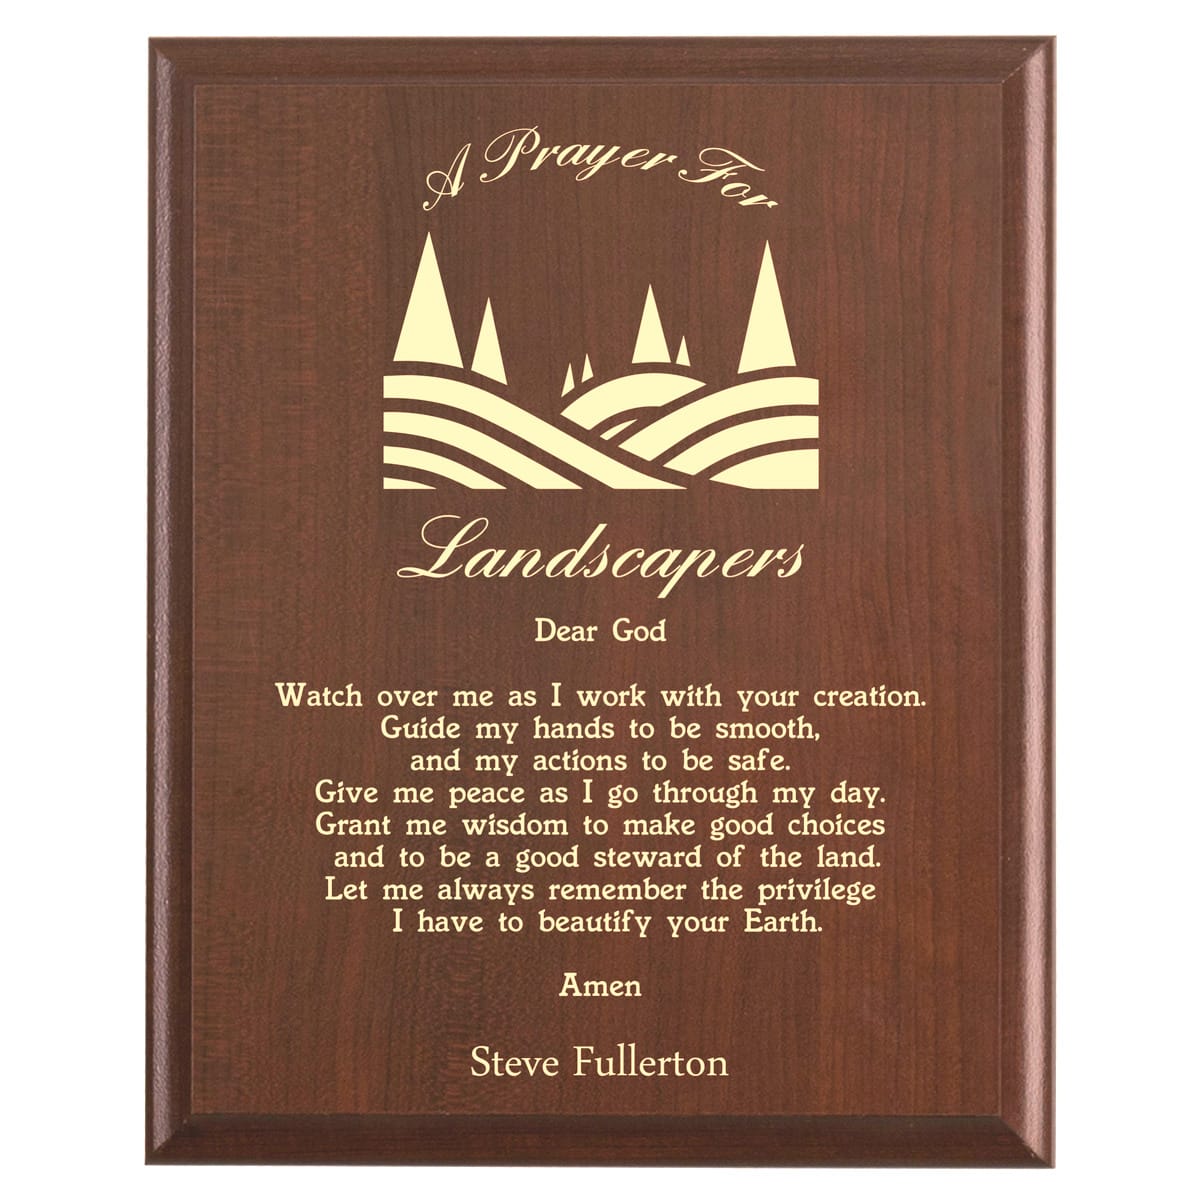 Plaque photo: Landscaper Prayer Plaque design with free personalization. Wood style finish with customized text.